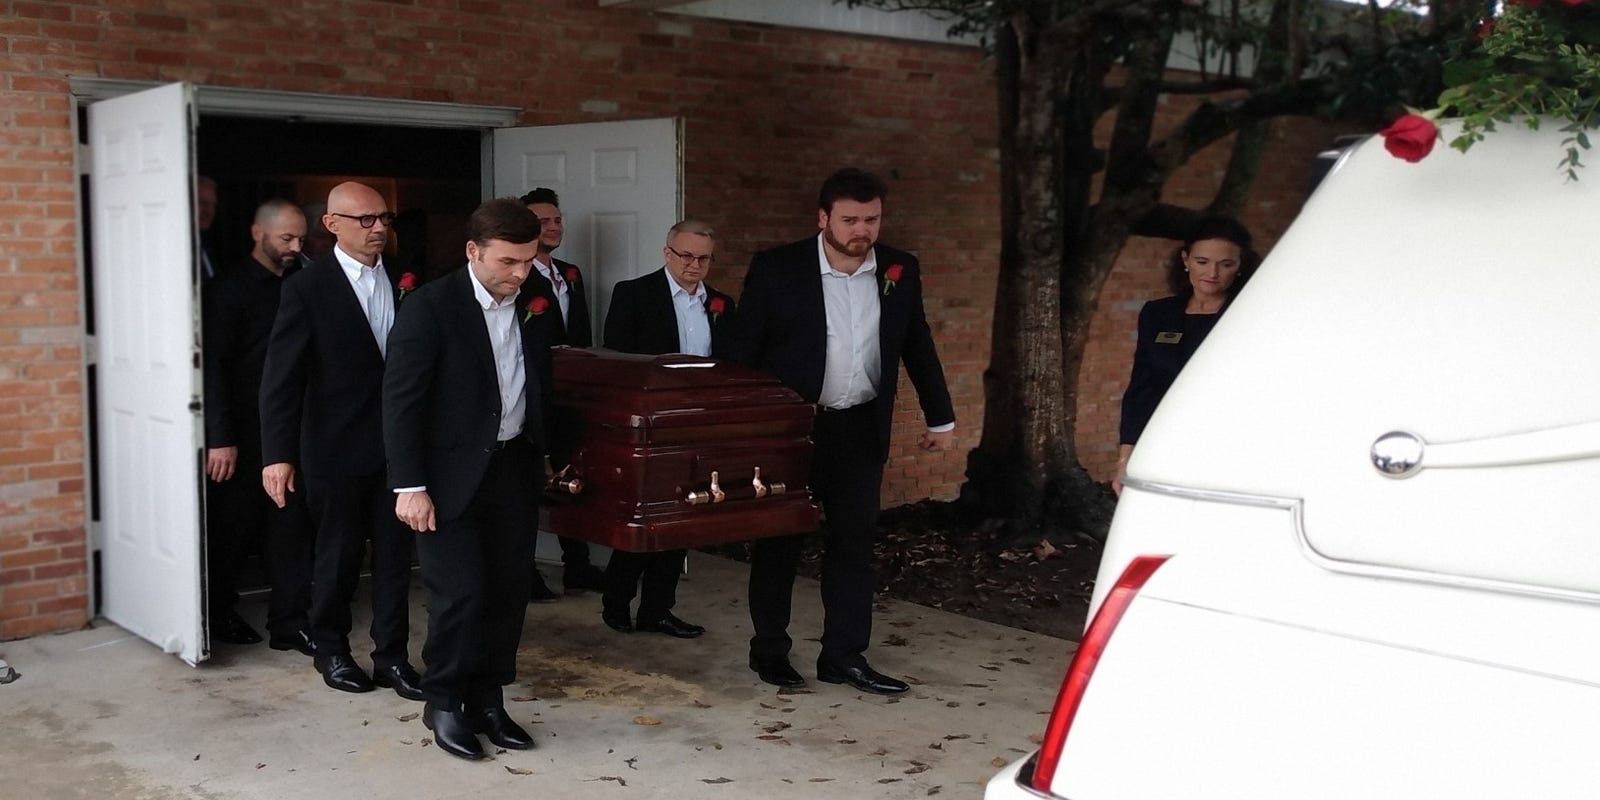 Jerry Lee Lewis: Jimmy Swaggart, others honor music legend at funeral